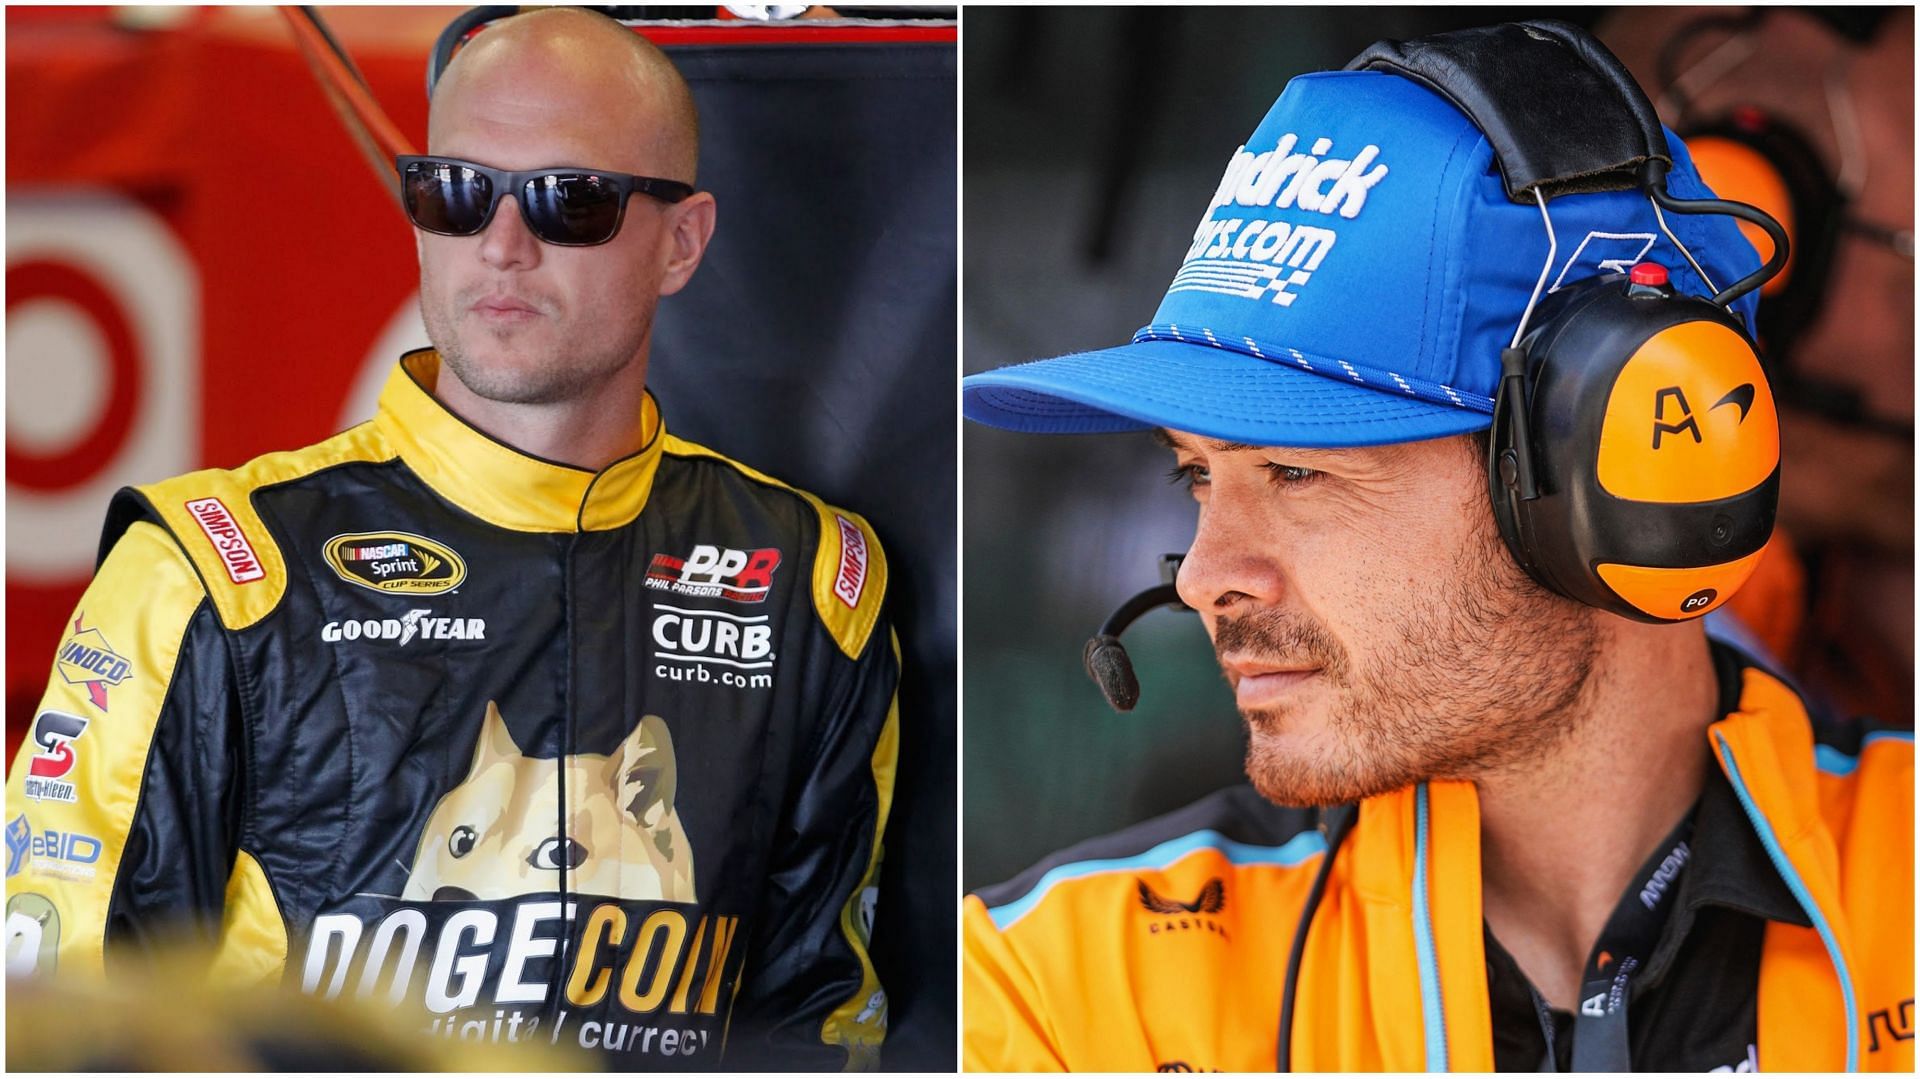 &quot;Failed driver&quot; Josh Wise (left) influenced the careers of Cup Series regulars like Kyle Larson (right) and Austin Dillon, but how?